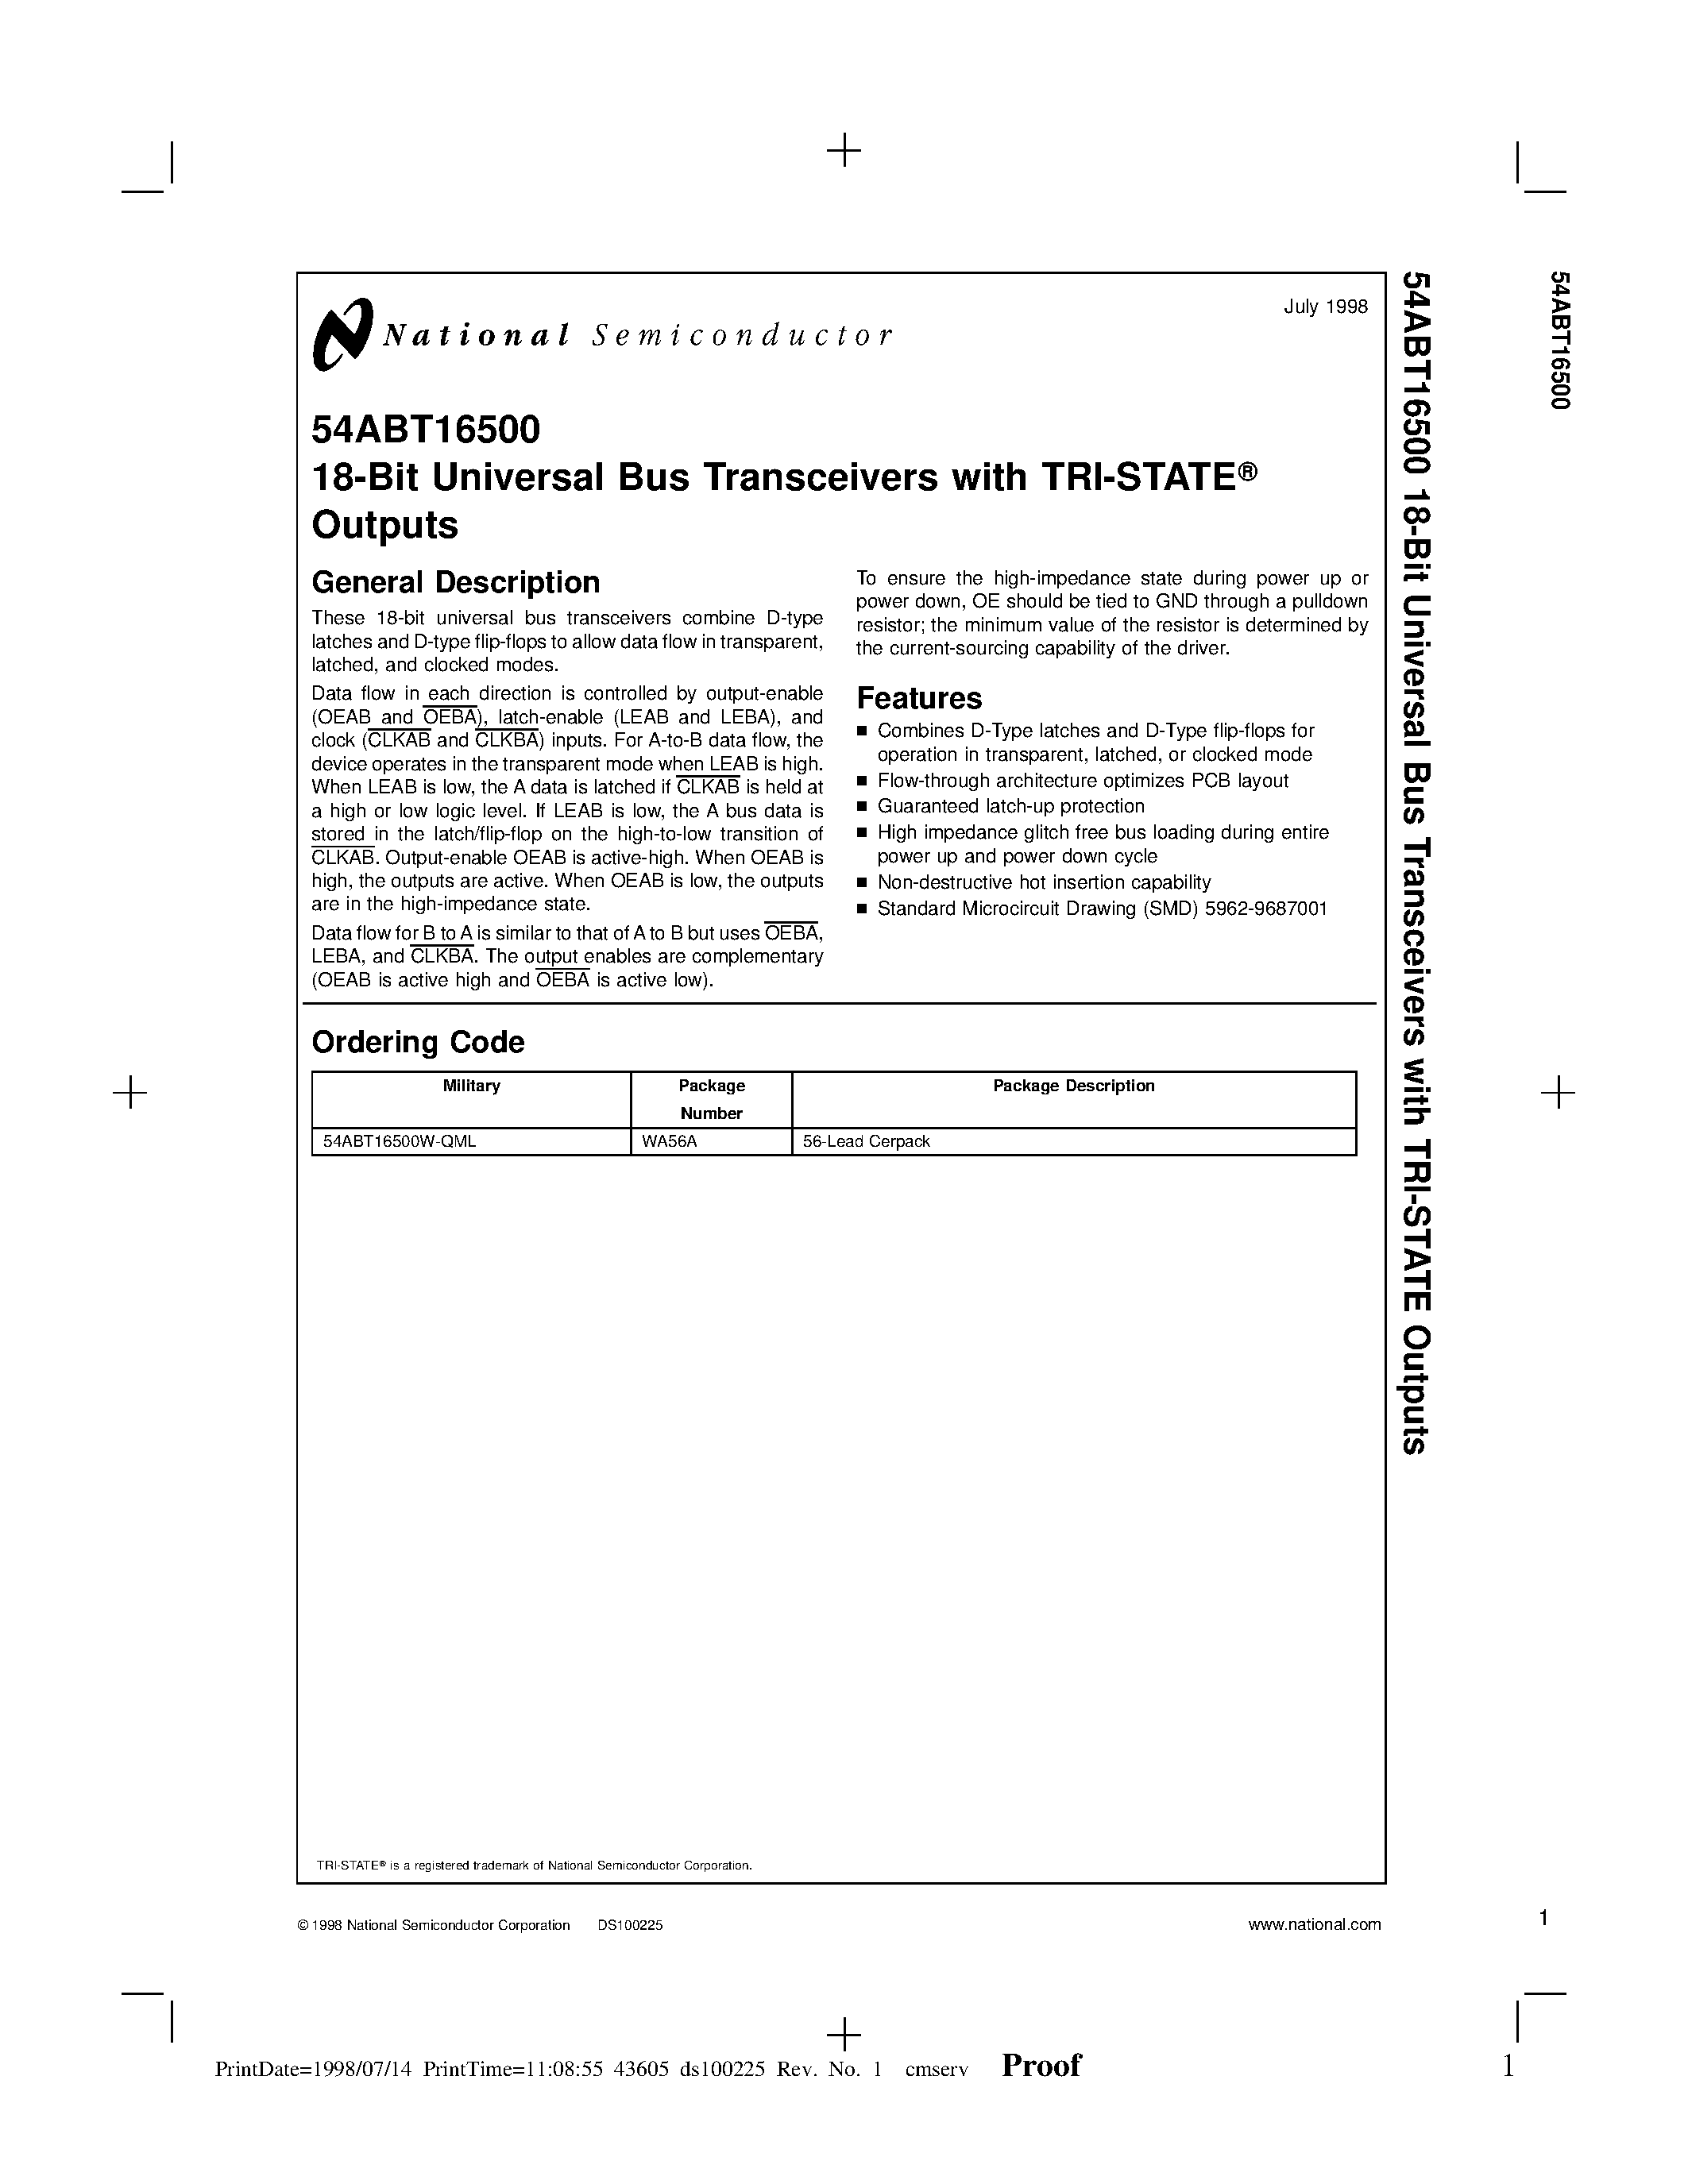 Datasheet 54ABT16500 - 18-Bit Universal Bus Transceivers with TRI-STATE Outputs page 1